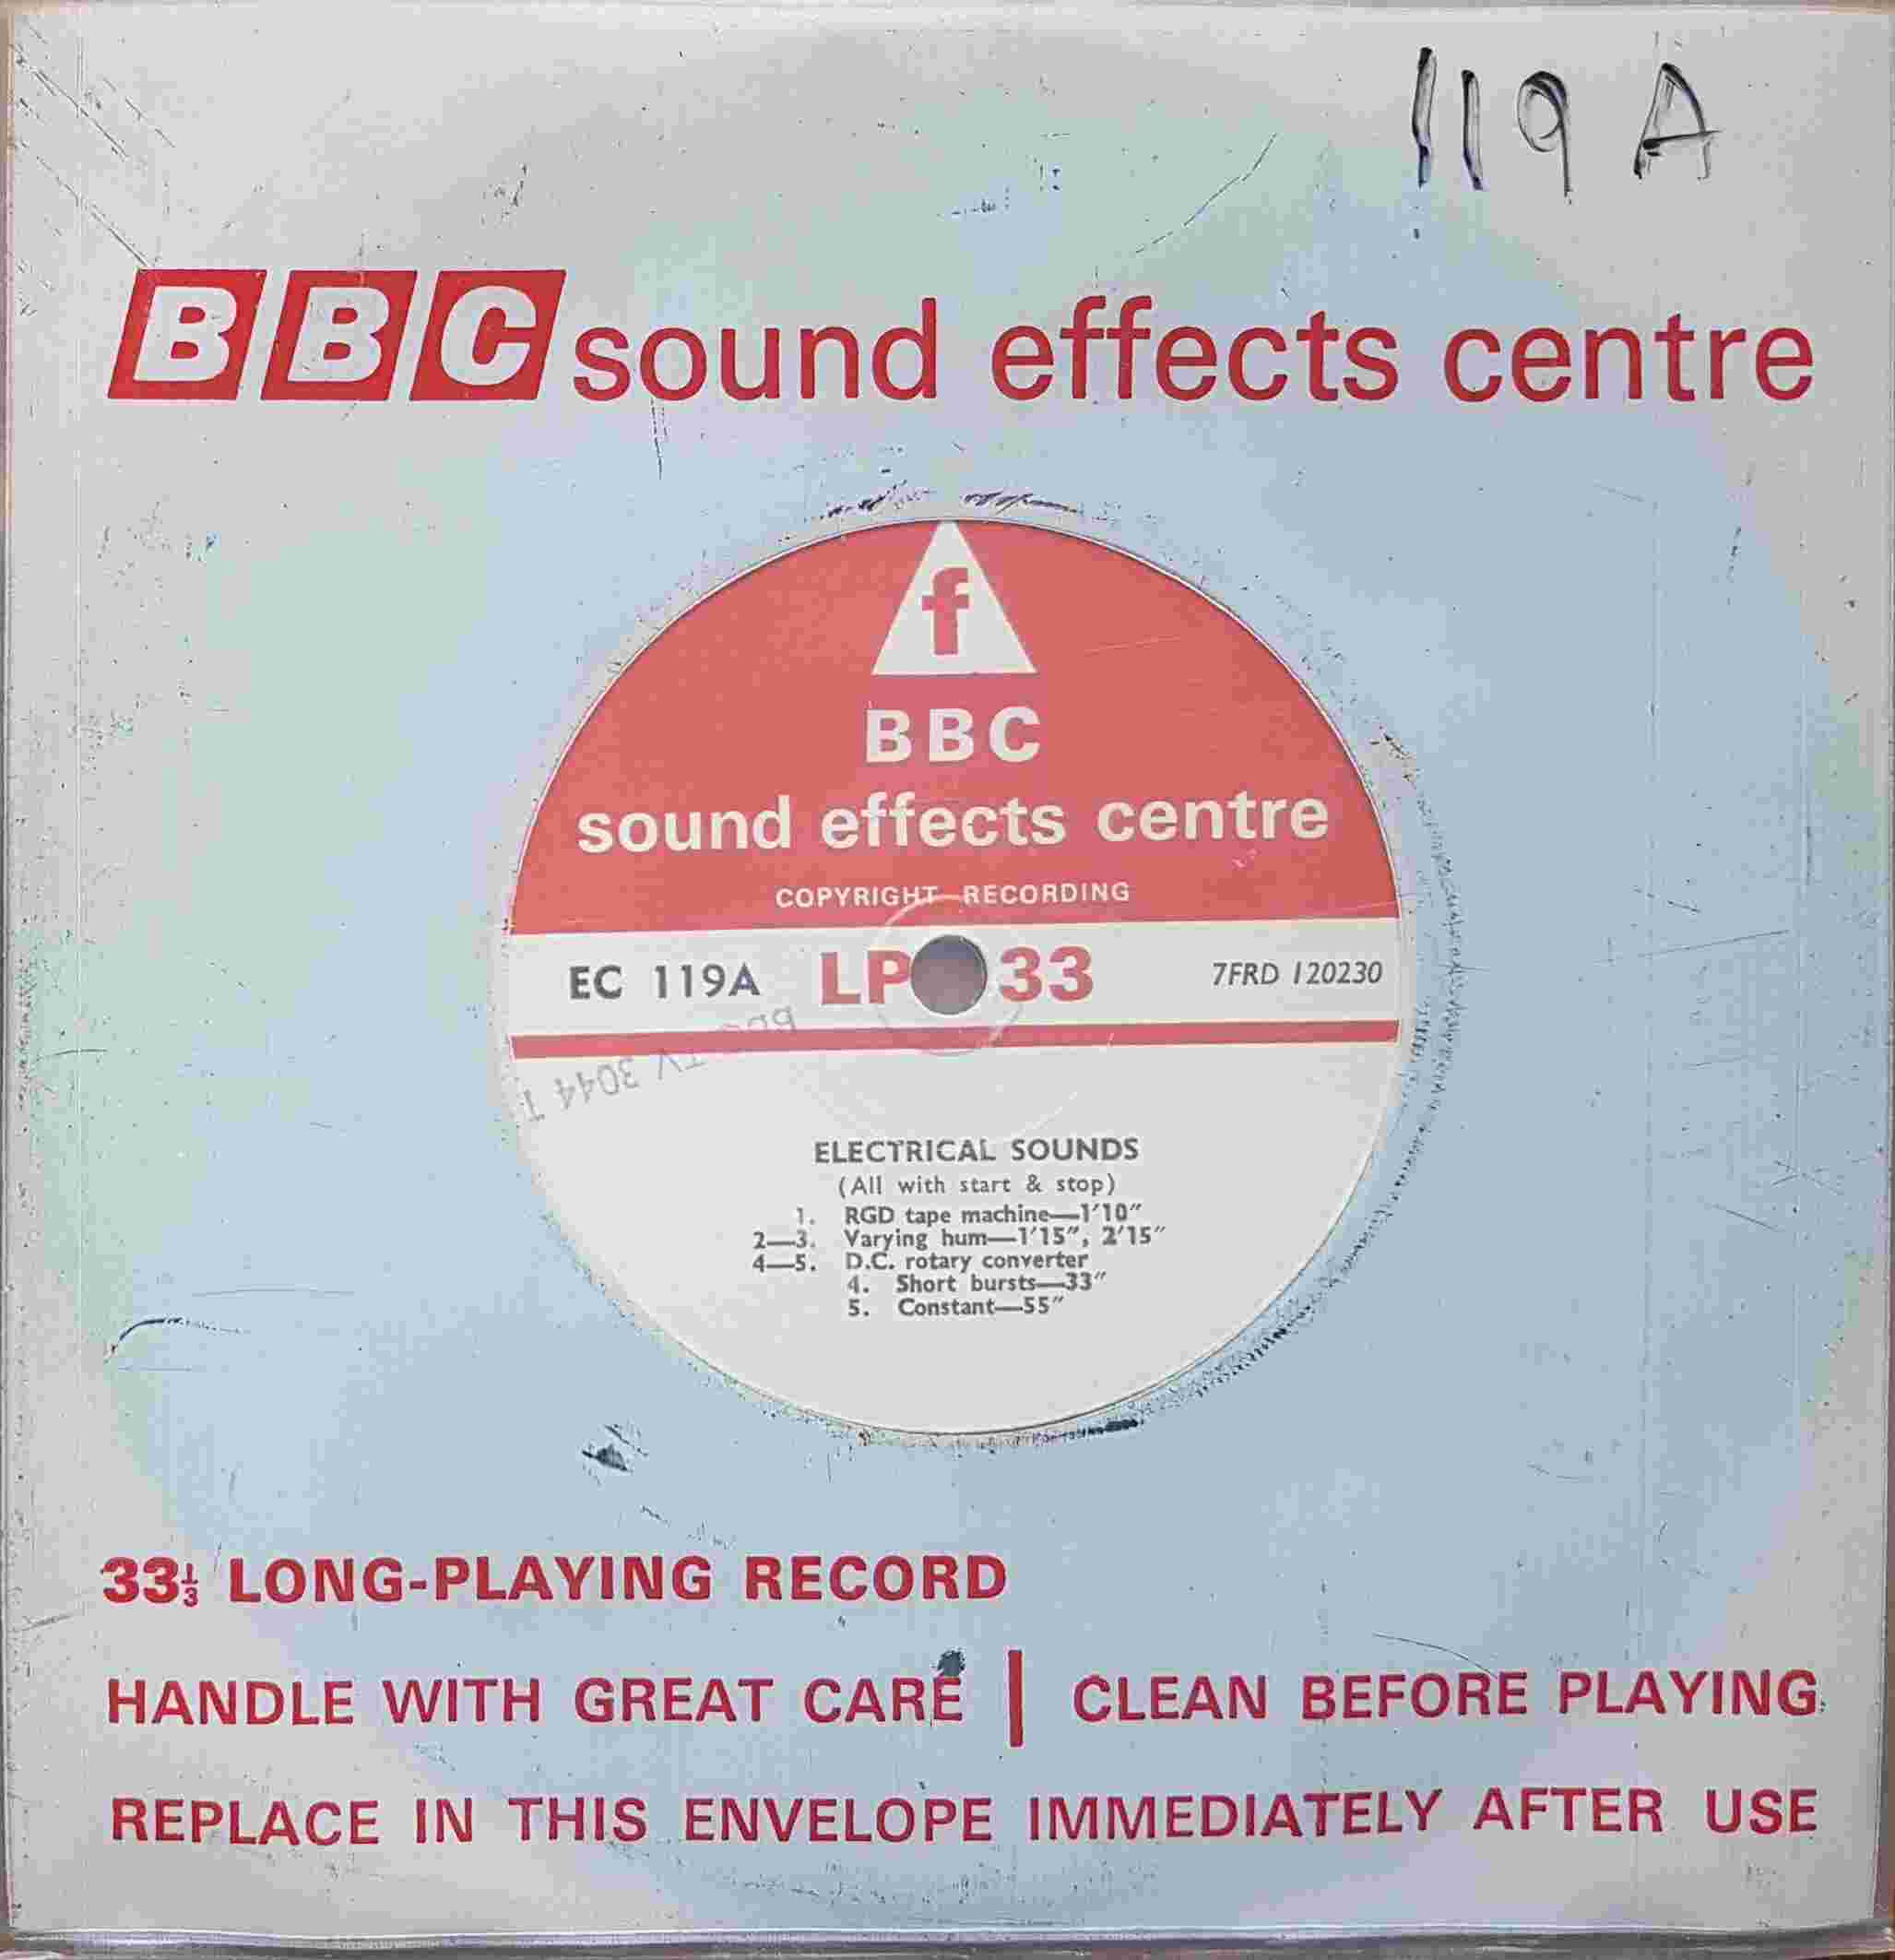 Picture of EC 119A Electric sounds by artist Not registered from the BBC singles - Records and Tapes library